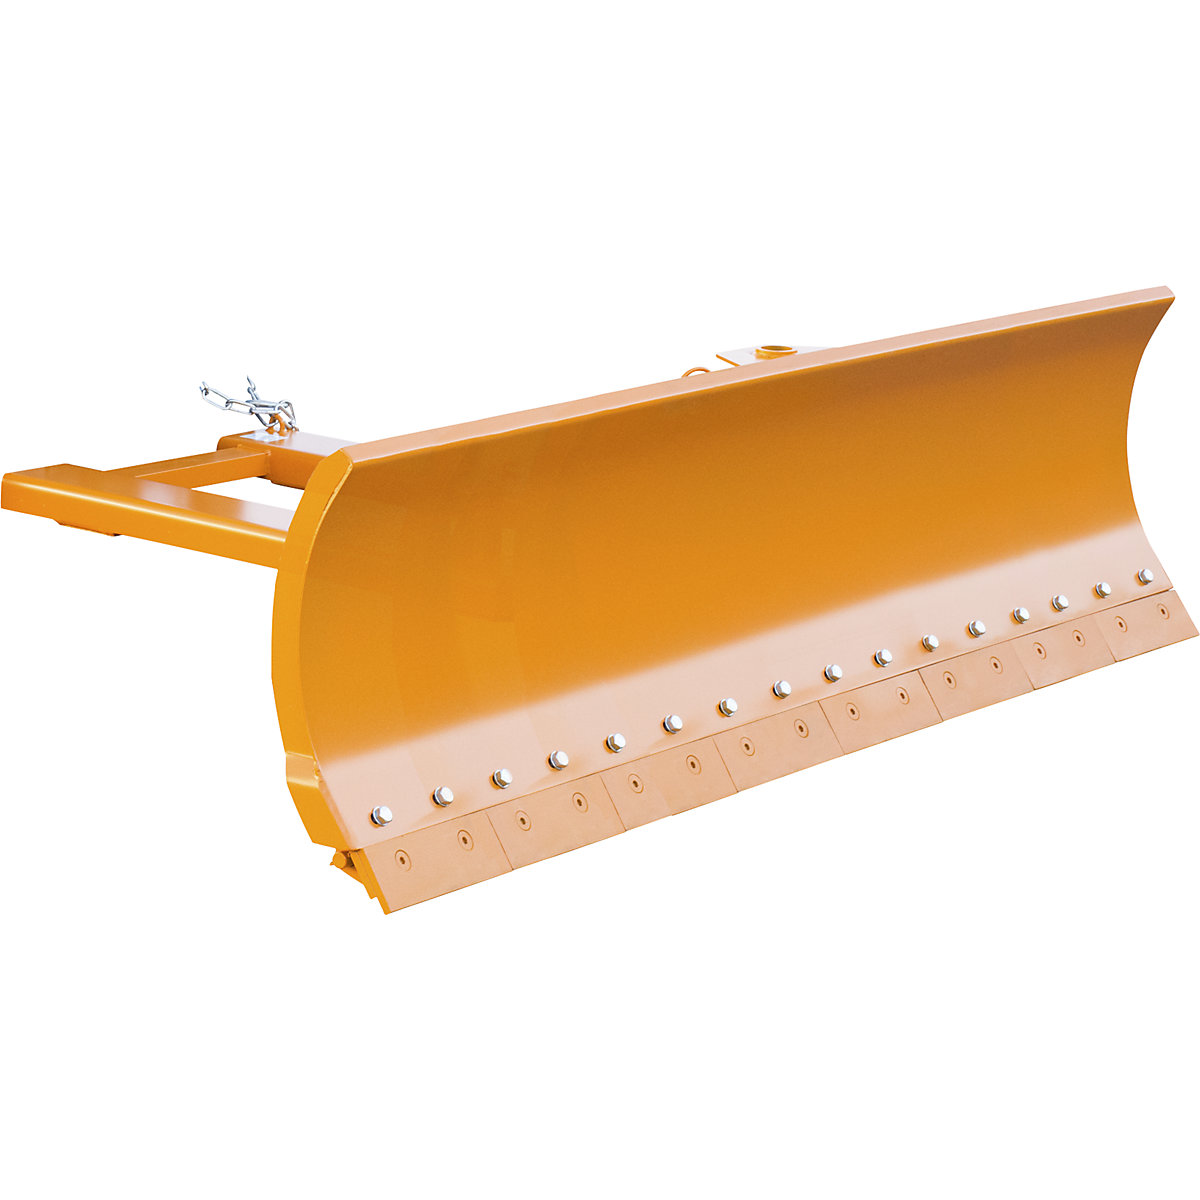 Snow plough for forklifts – eurokraft pro, with spring-loaded blade trims, blade width 2400 mm